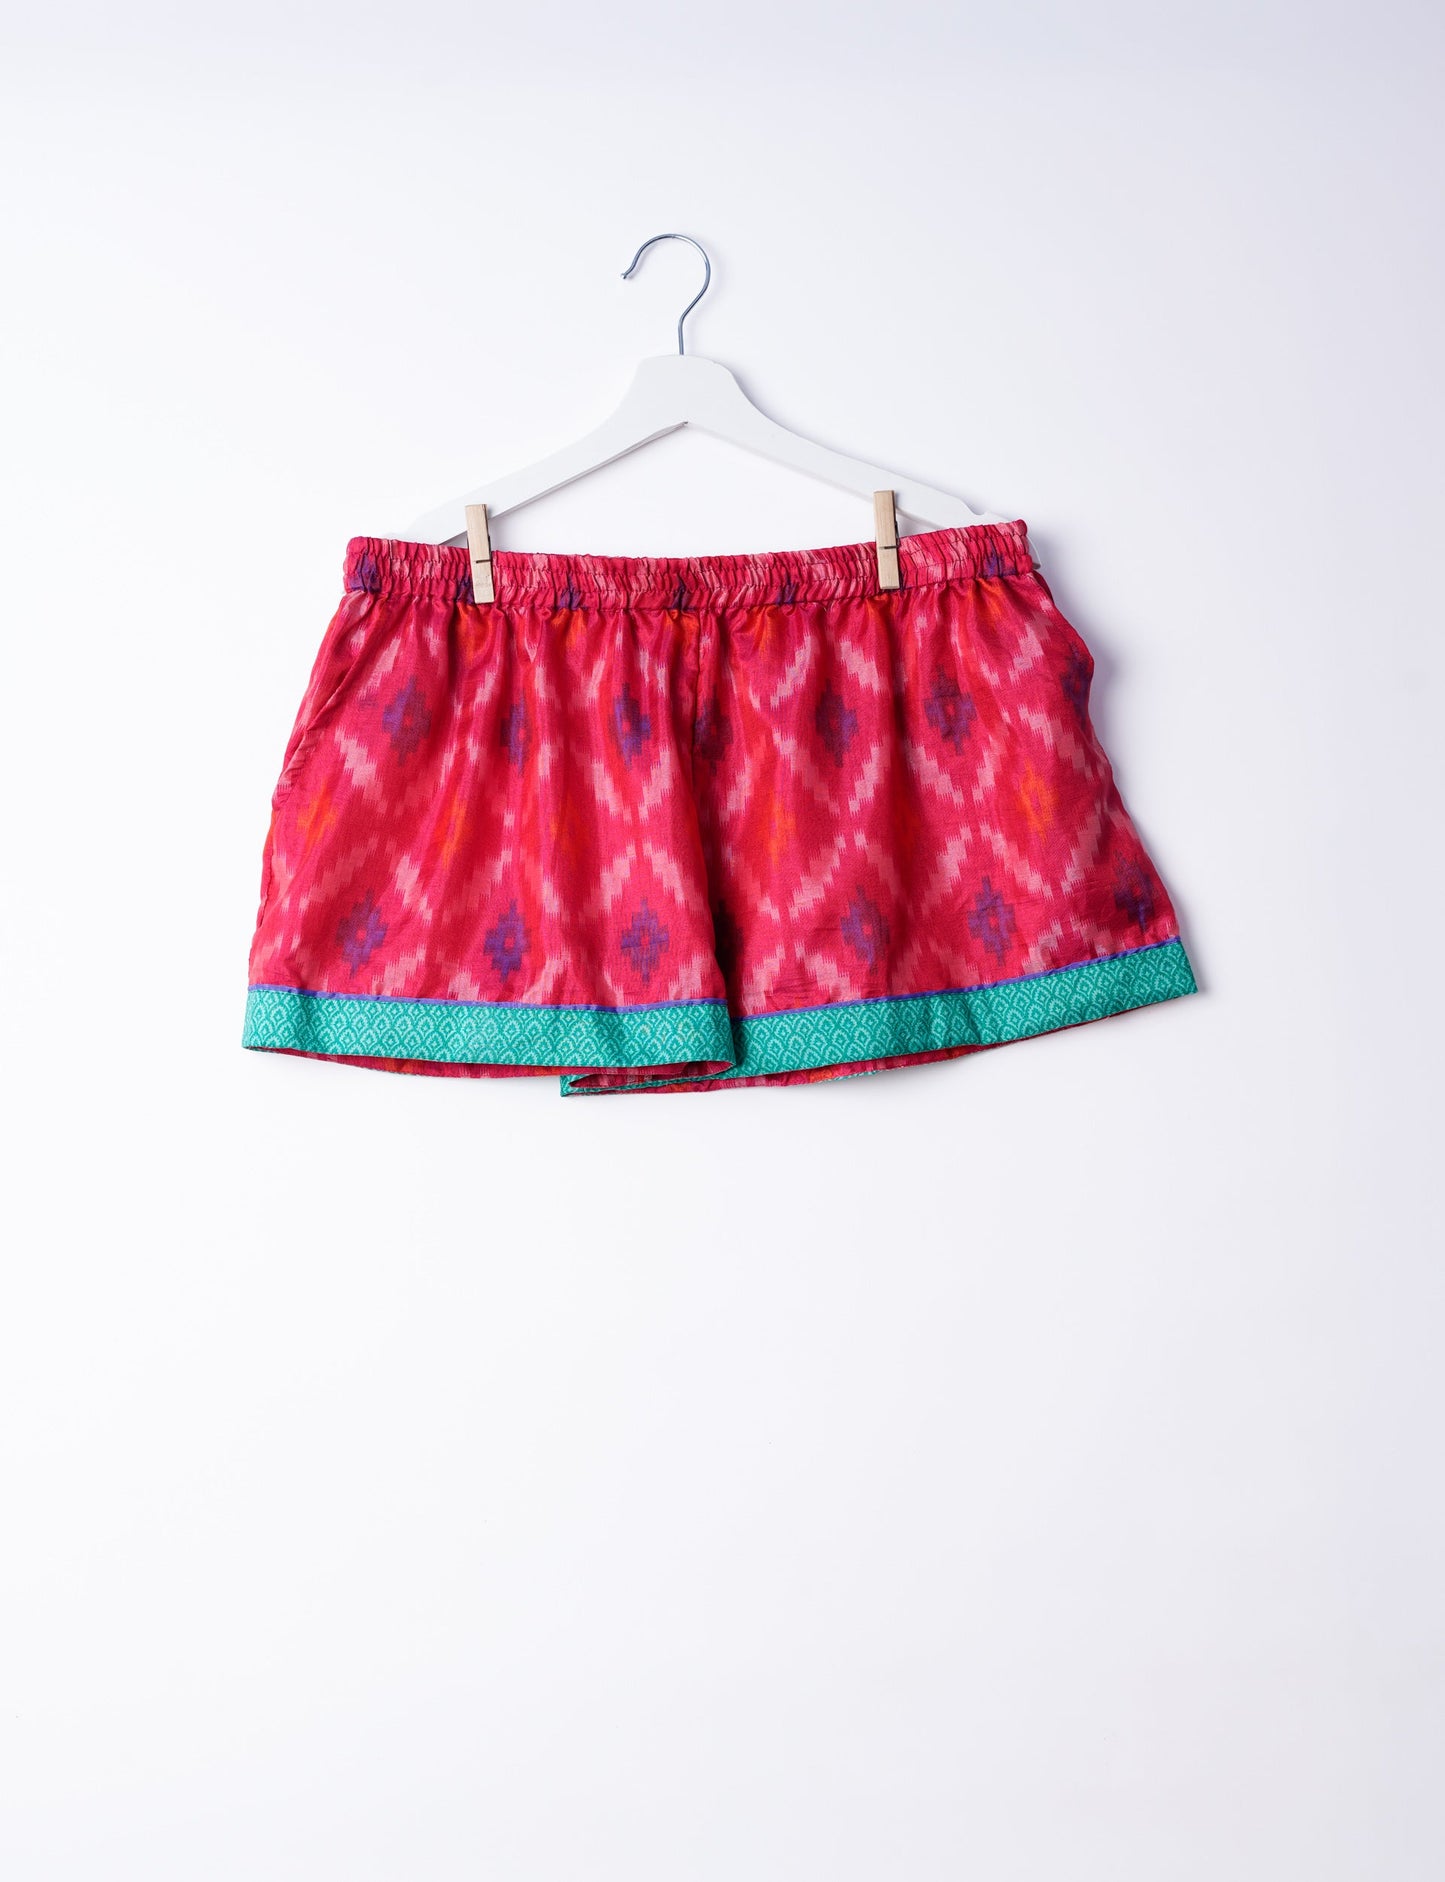 Indulge in comfort and style with our PJ Set Short, now with short sleeves. Crafted from upcycled saris, these shorts embody a zero-waste mentality for sustainable sleepwear. Versatile from day to night, perfect for beach lounging or poolside yoga, these pajamas redefine conscious fashion.